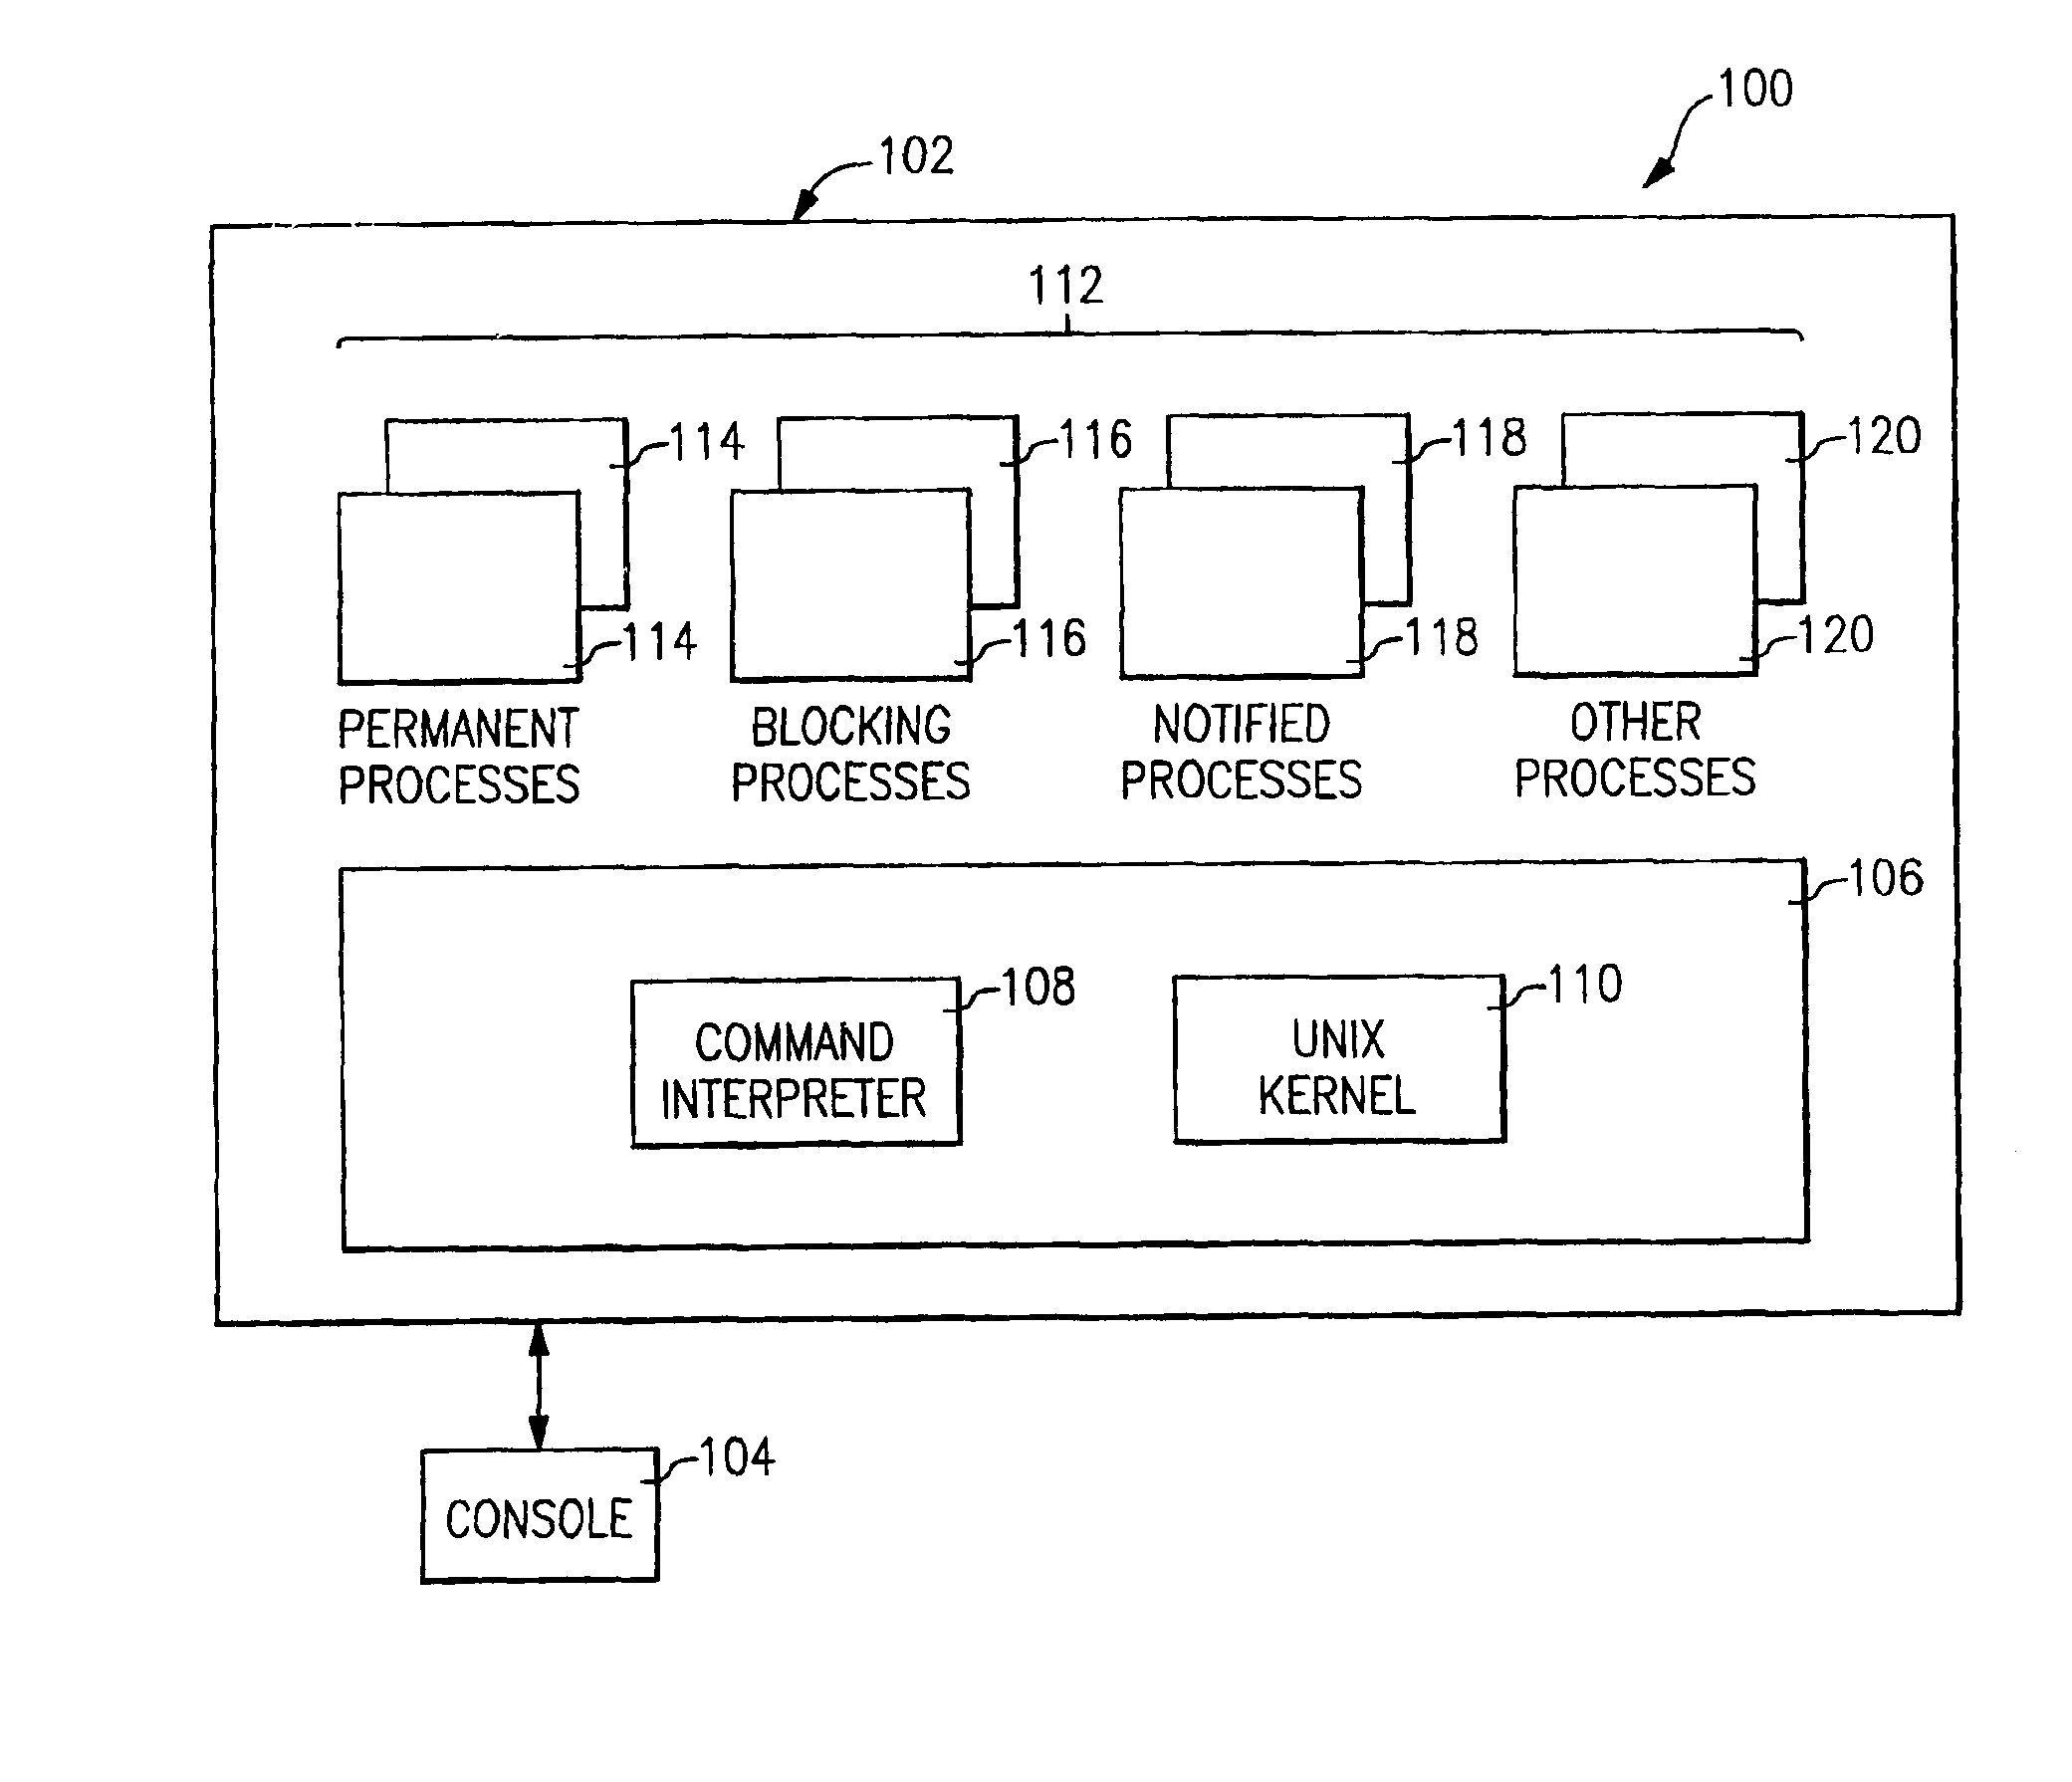 Method and apparatus for controlling the termination of processes in response to a shutdown command